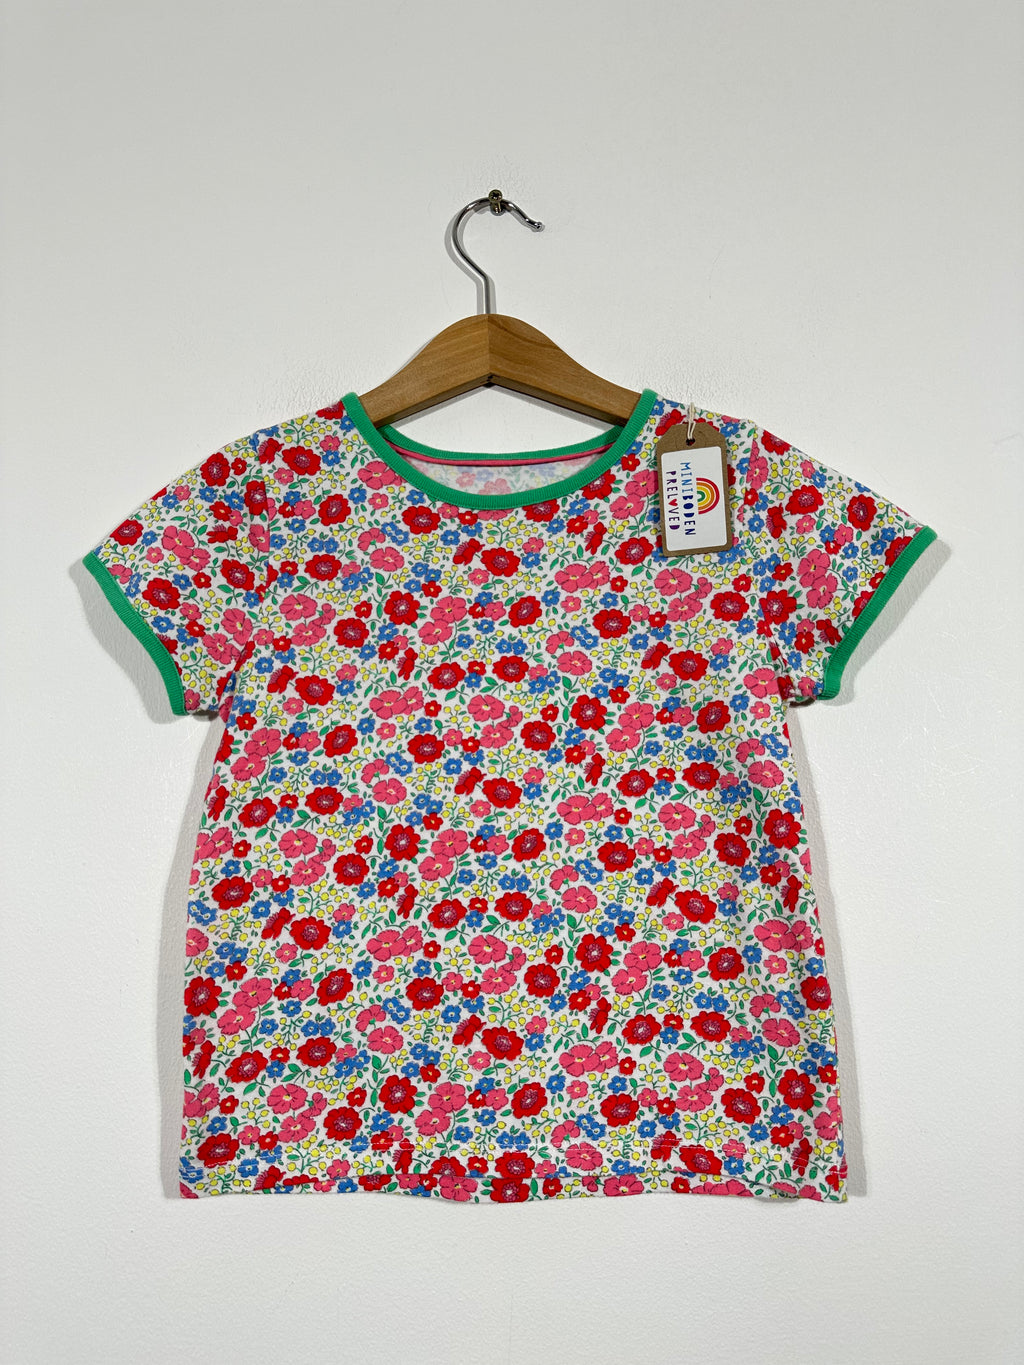 Pink Floral Liberty Patterned Top (3-4 Years)